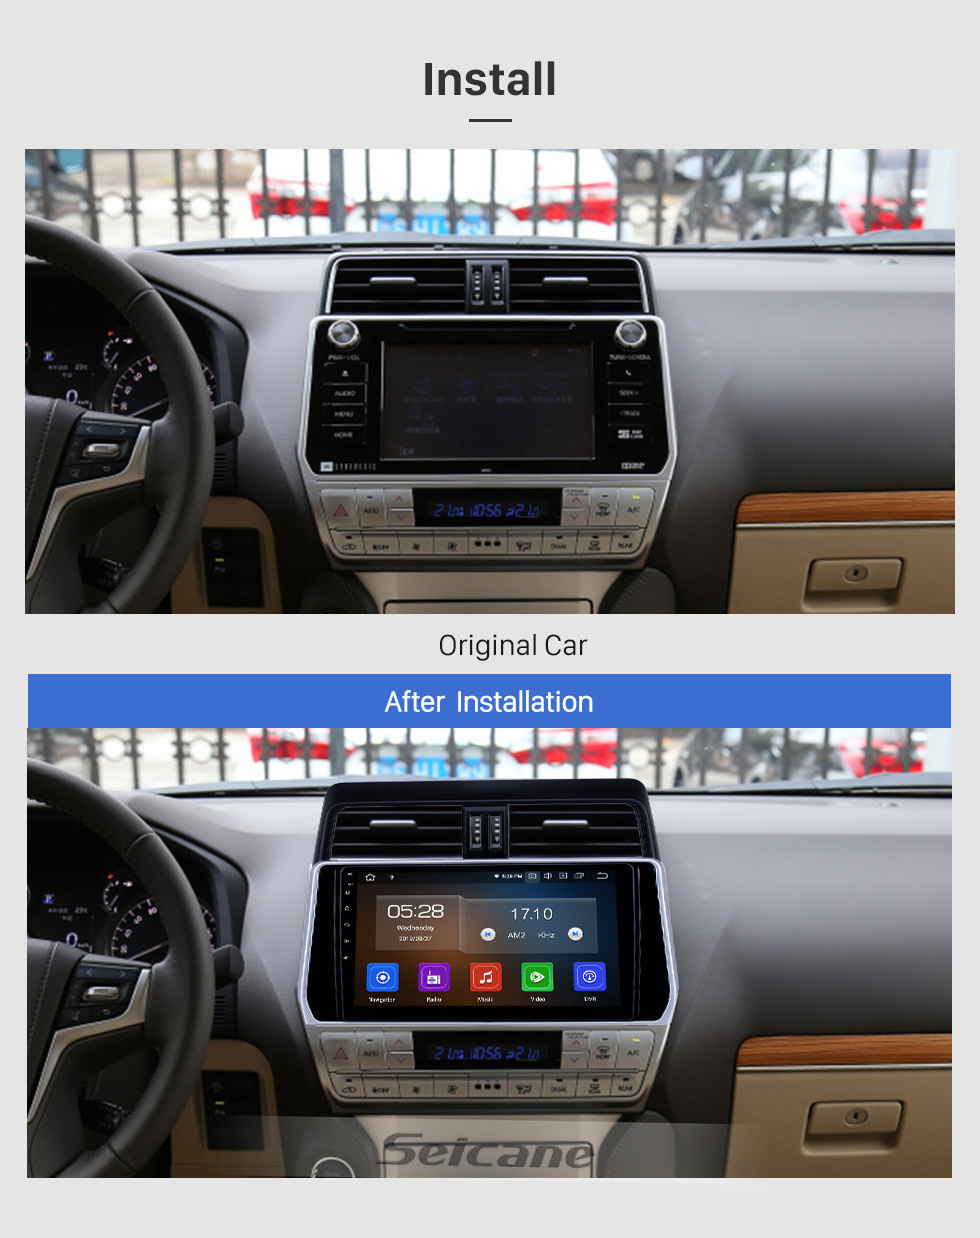 Seicane 10.1 inch Android 11.0 GPS Navigation Radio for 2018 Toyota Prado Bluetooth HD Touchscreen AUX Carplay support Backup camera